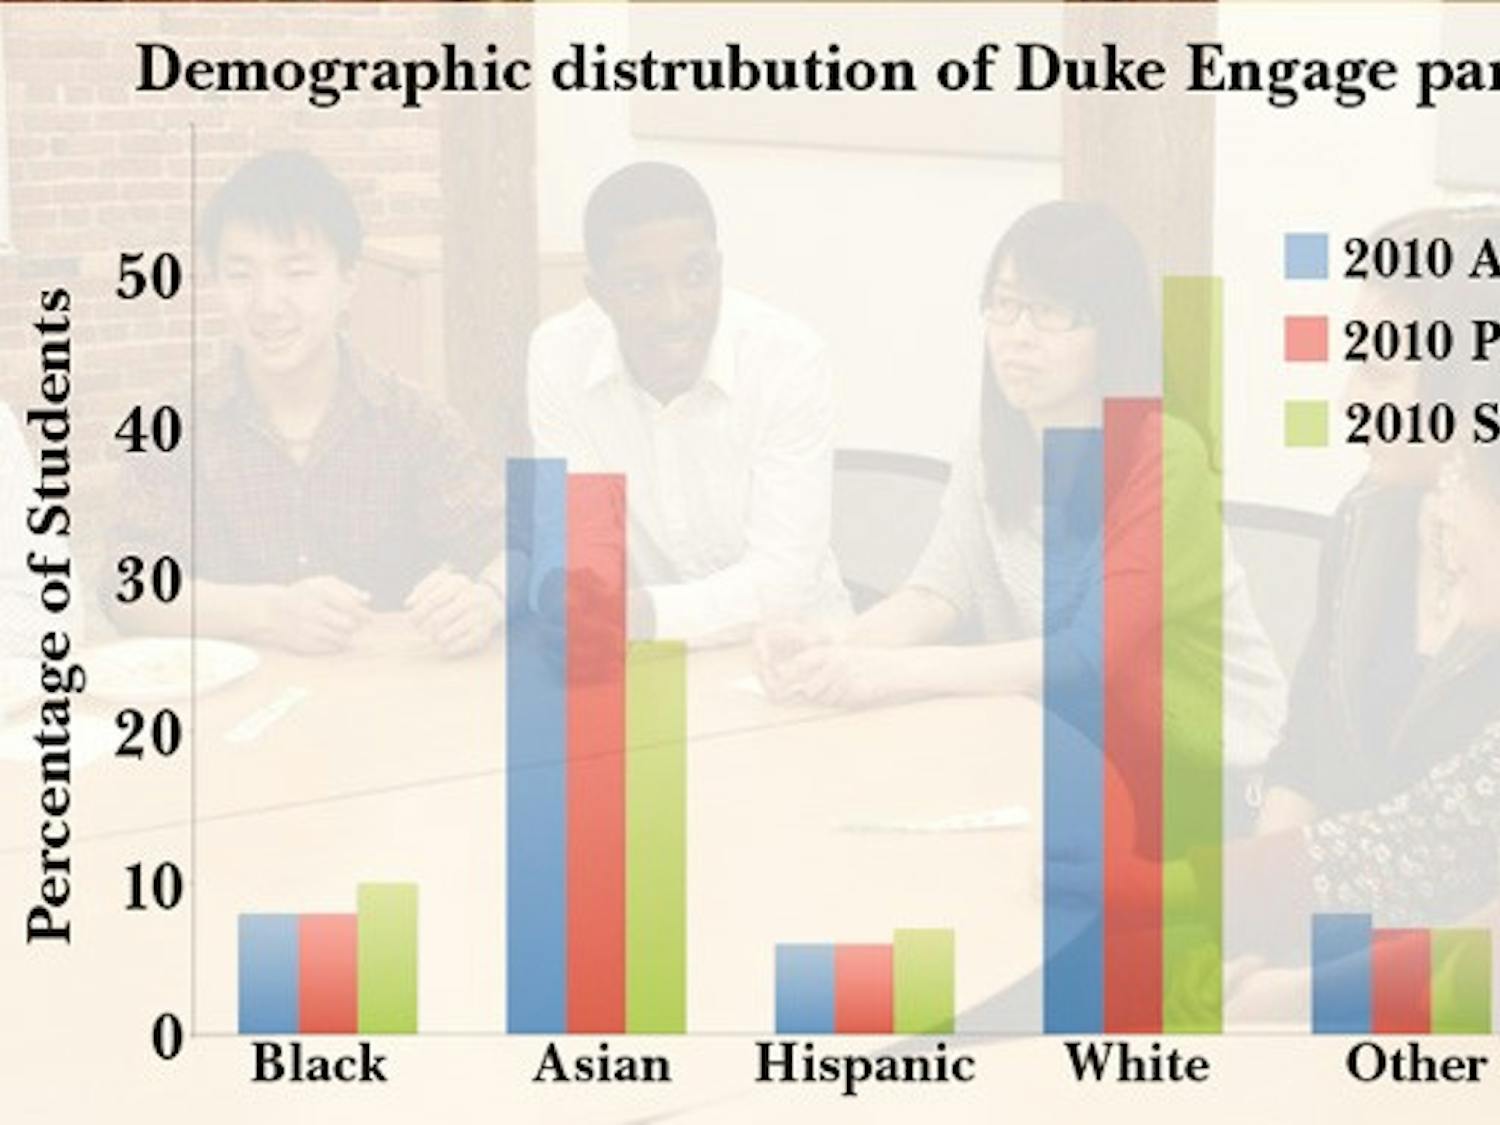 The distrubution of applicants and participants in DukeEngage programs by background nearly mirrored the percentages of the student body, with Asian students as the only group overrepresented.